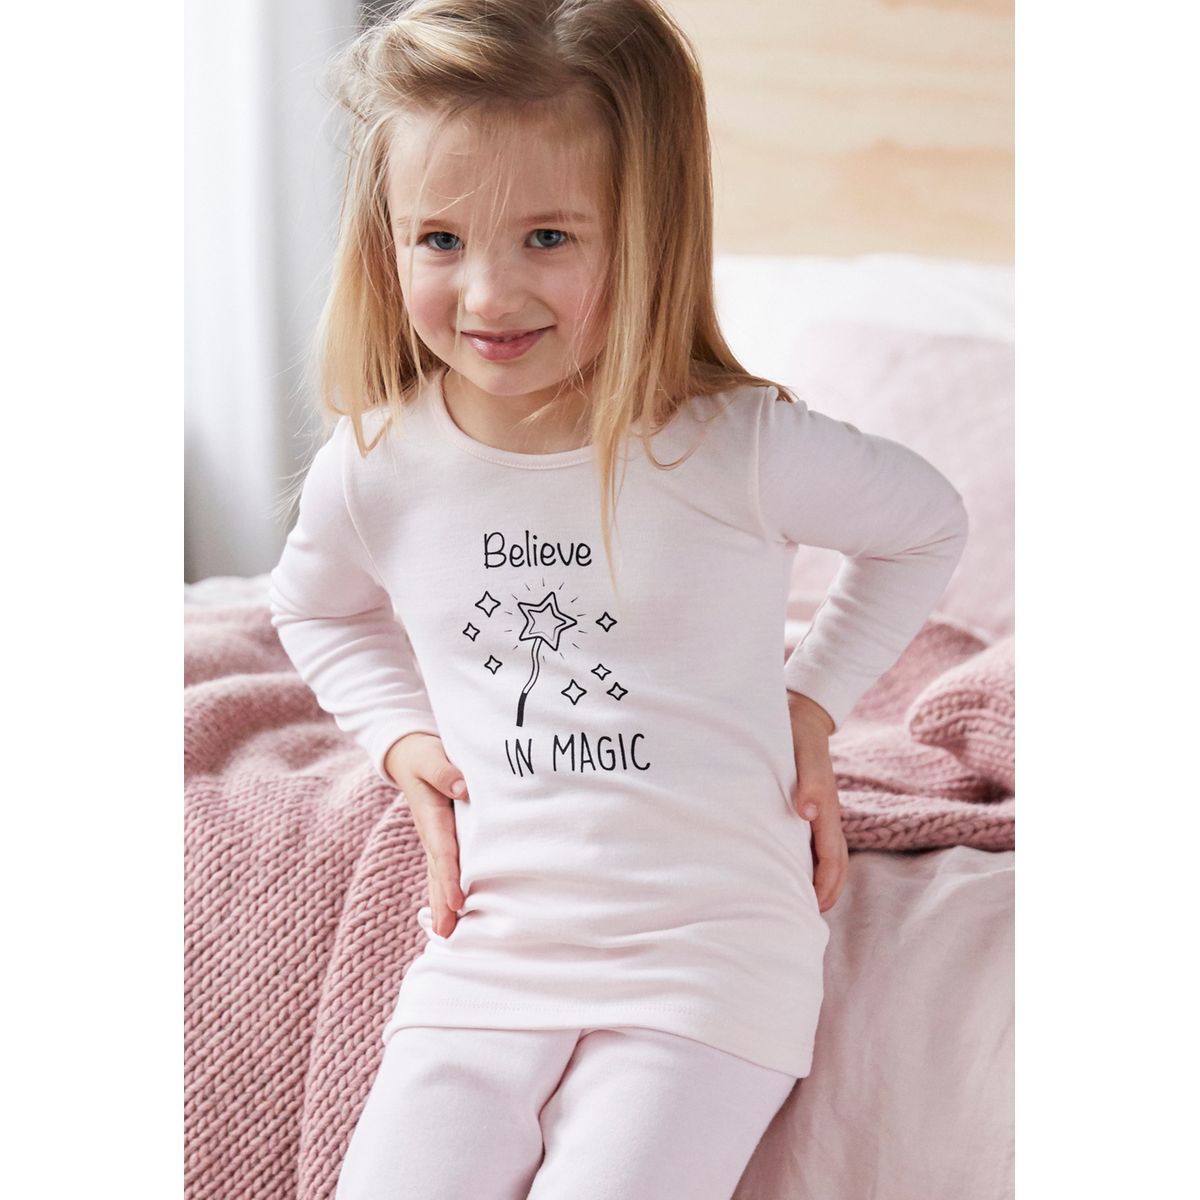 Sous pull thermolactyl de Damart - Damart - 3 ans | Beebs